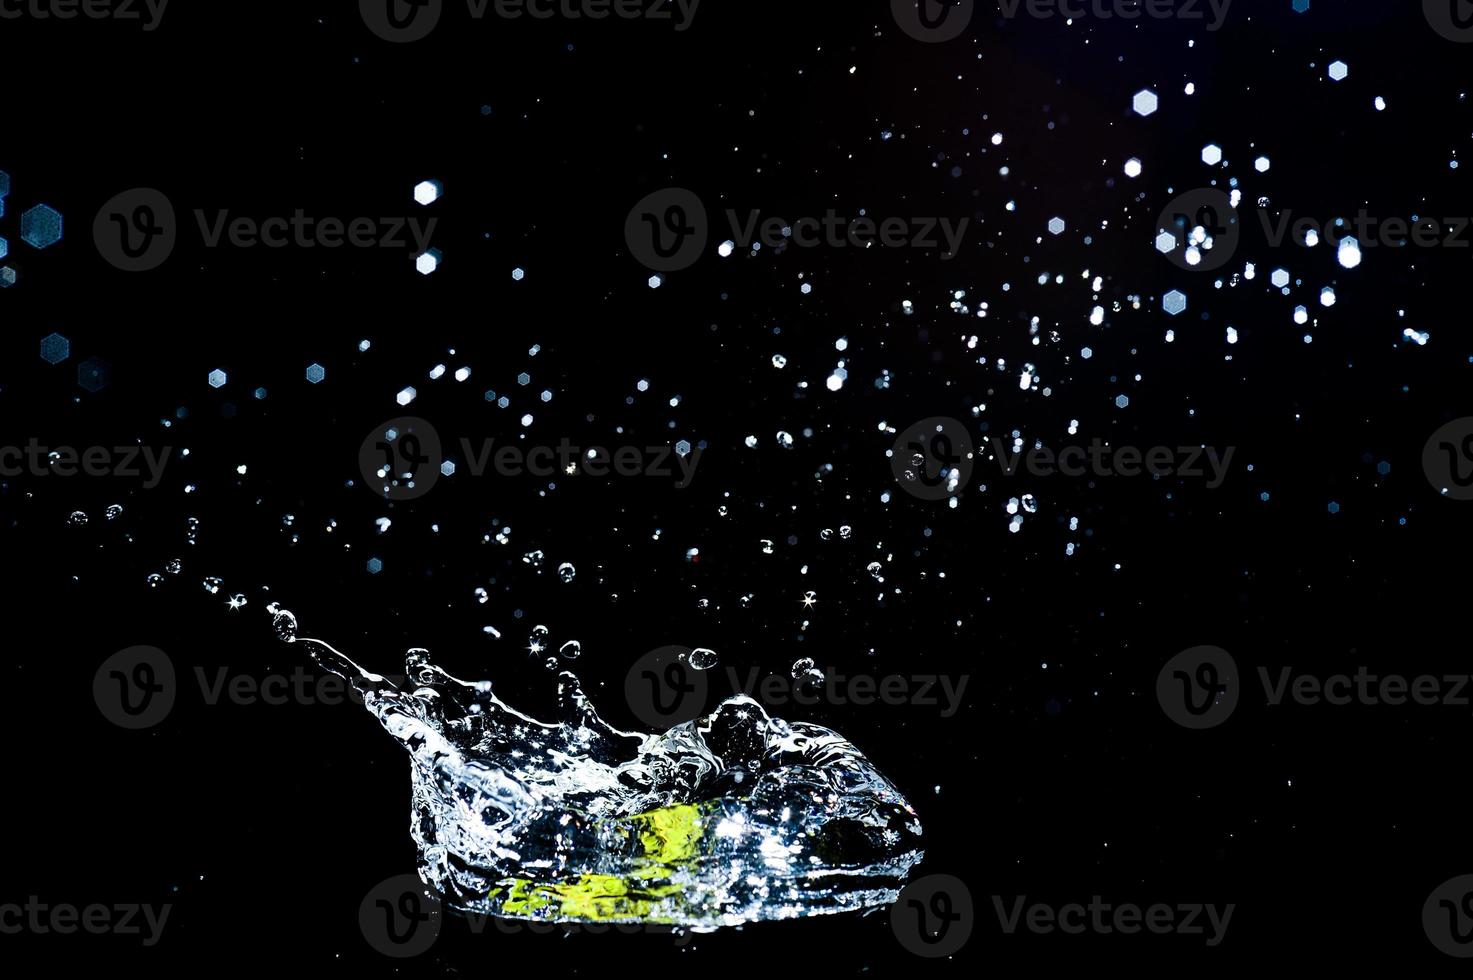 Scattered water splashes on a black background. water splash isolated on the black background photo